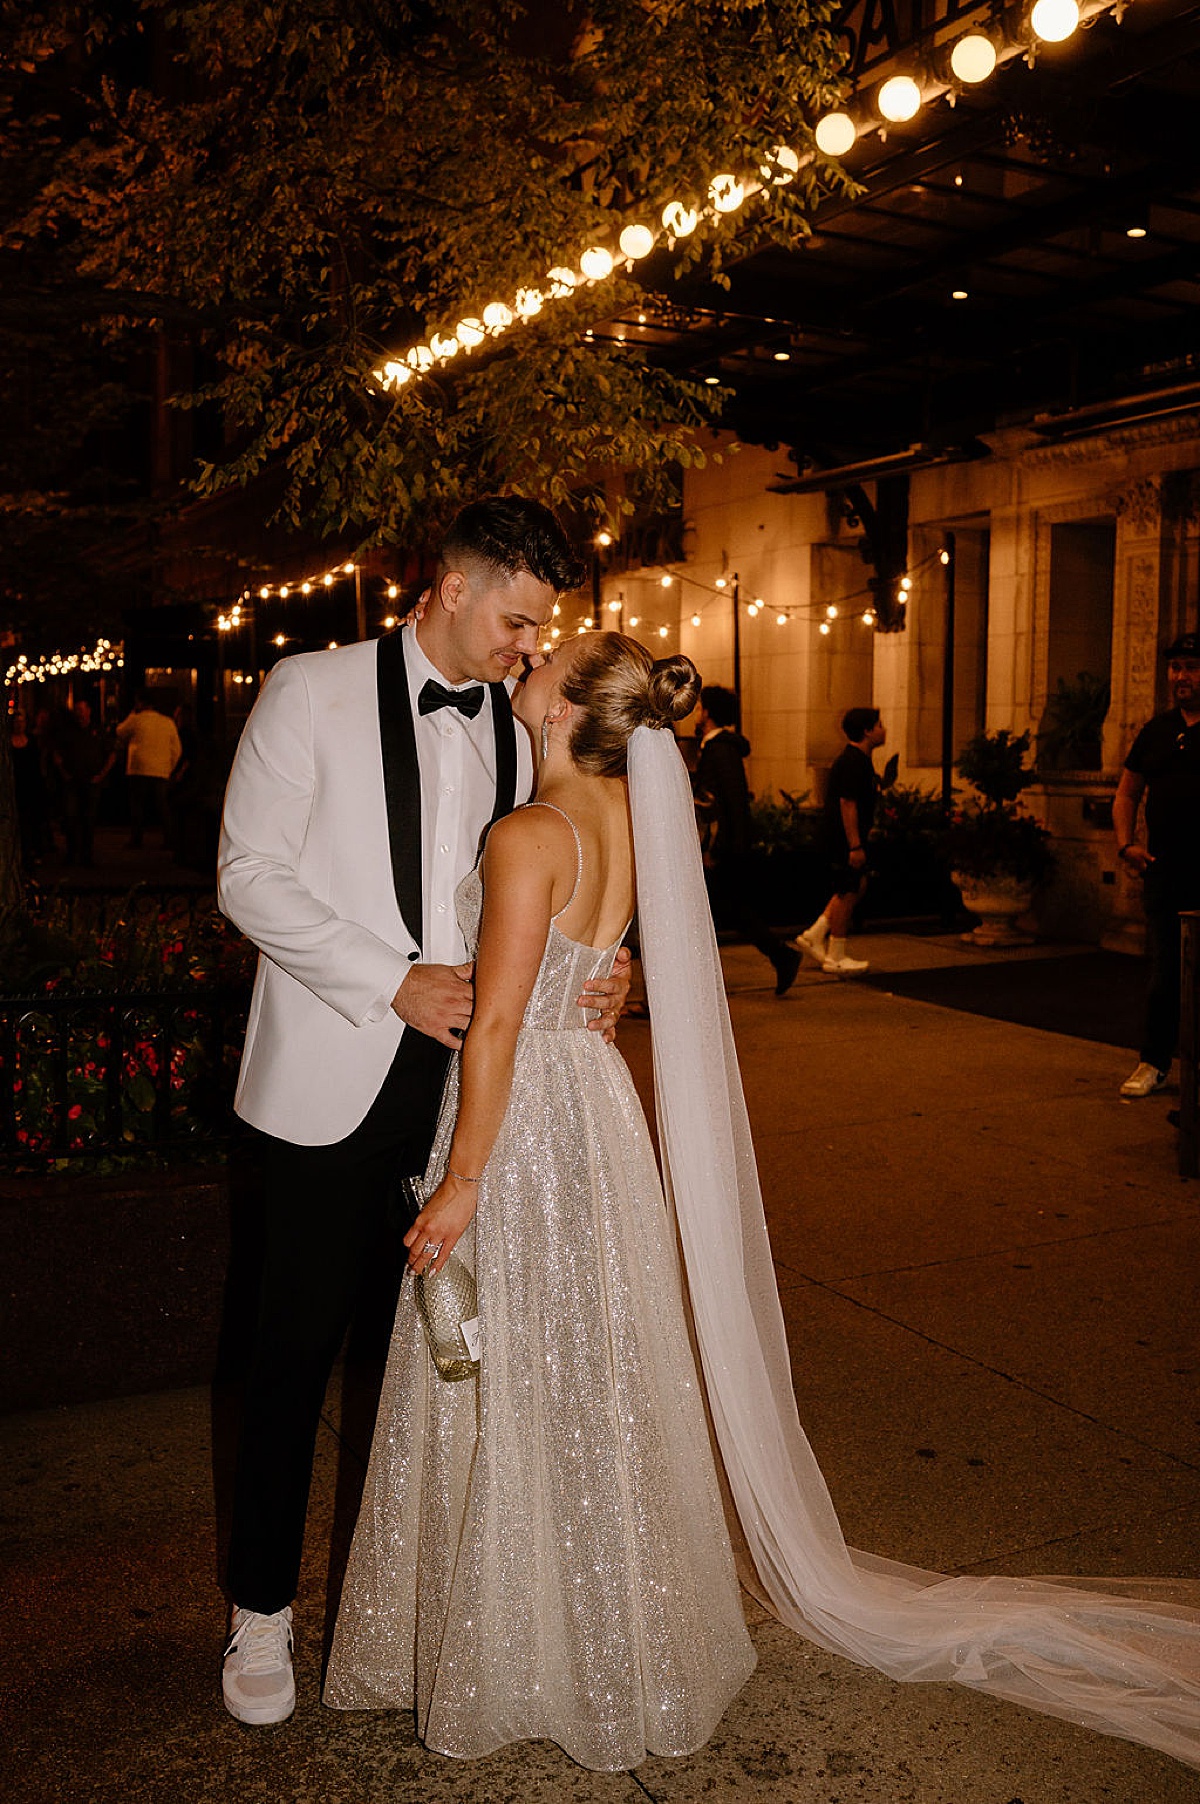 bride with sparkling wedding gown and groom in white jacket kiss over a bottle of champagne after elegant wedding shot by Indigo Lace Collective